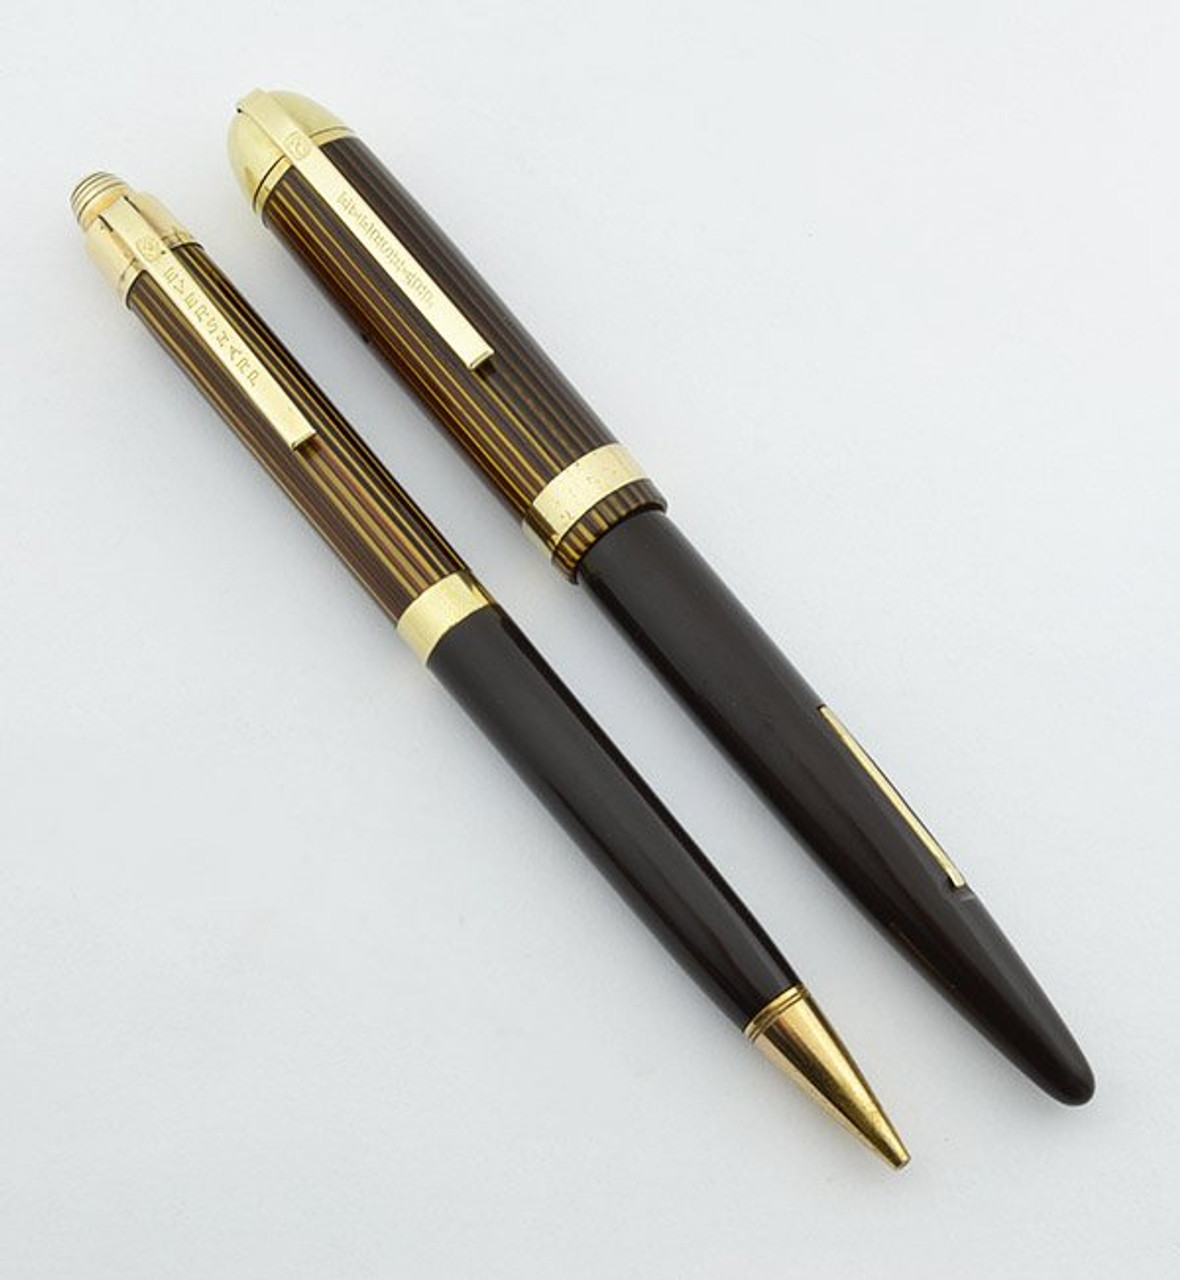 Eversharp Skyline Fountain Pen and Pencil Set - Striped Brown Cap & Solid Barrel, Wide Band, Flexible Medium (Very Nice, Restored)